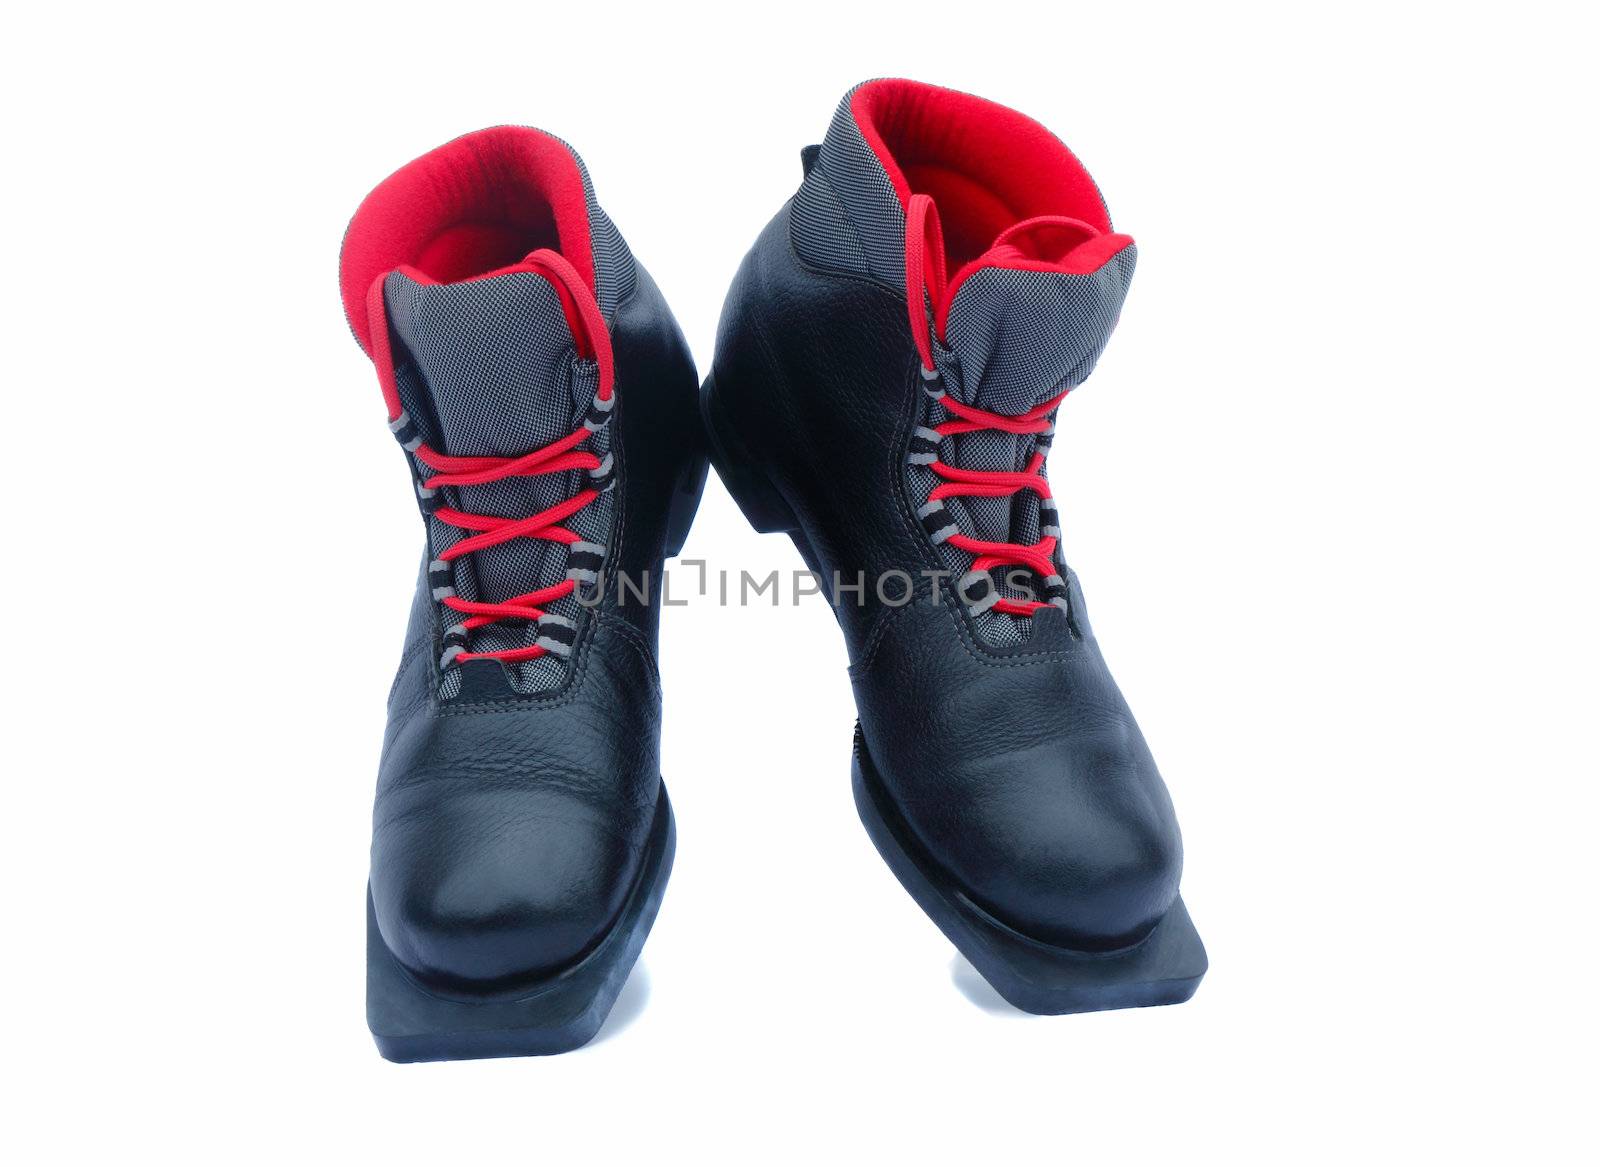 Leather black ski boots with a red lining. Are presented on a white background.